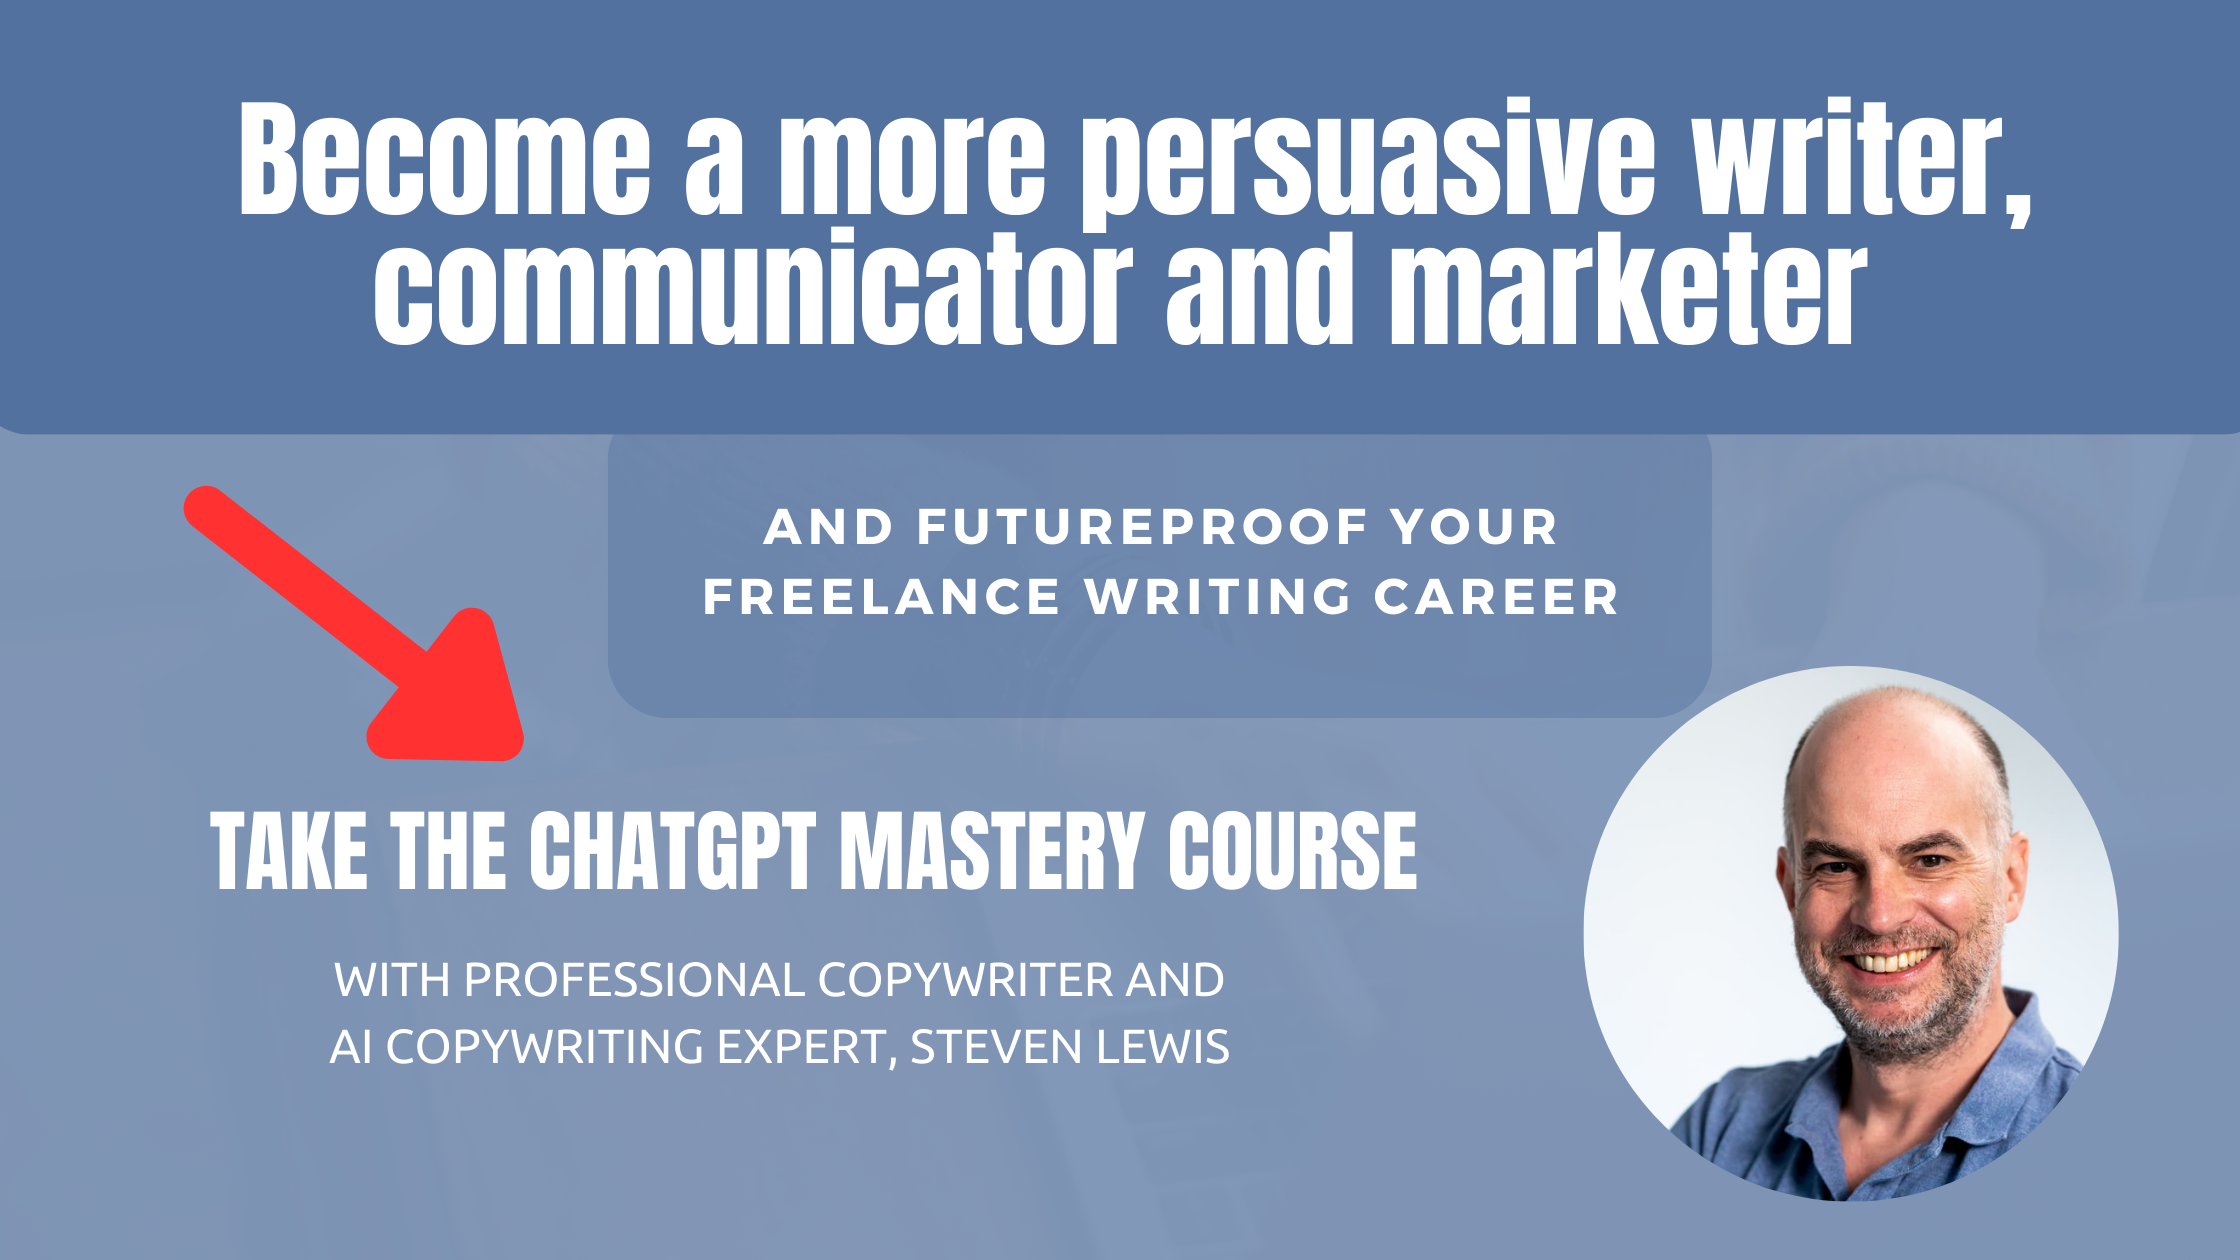 Image shows AI Copywriting Expert, Steven Lewis in a blue polo neck shirt with the words "Become a more persuasive writer, communicator and marketer and future proof your freelance writer career.  Take the ChatGPT Mastery Course with professional copywriter and AI copywriting expert, Steven Lewis